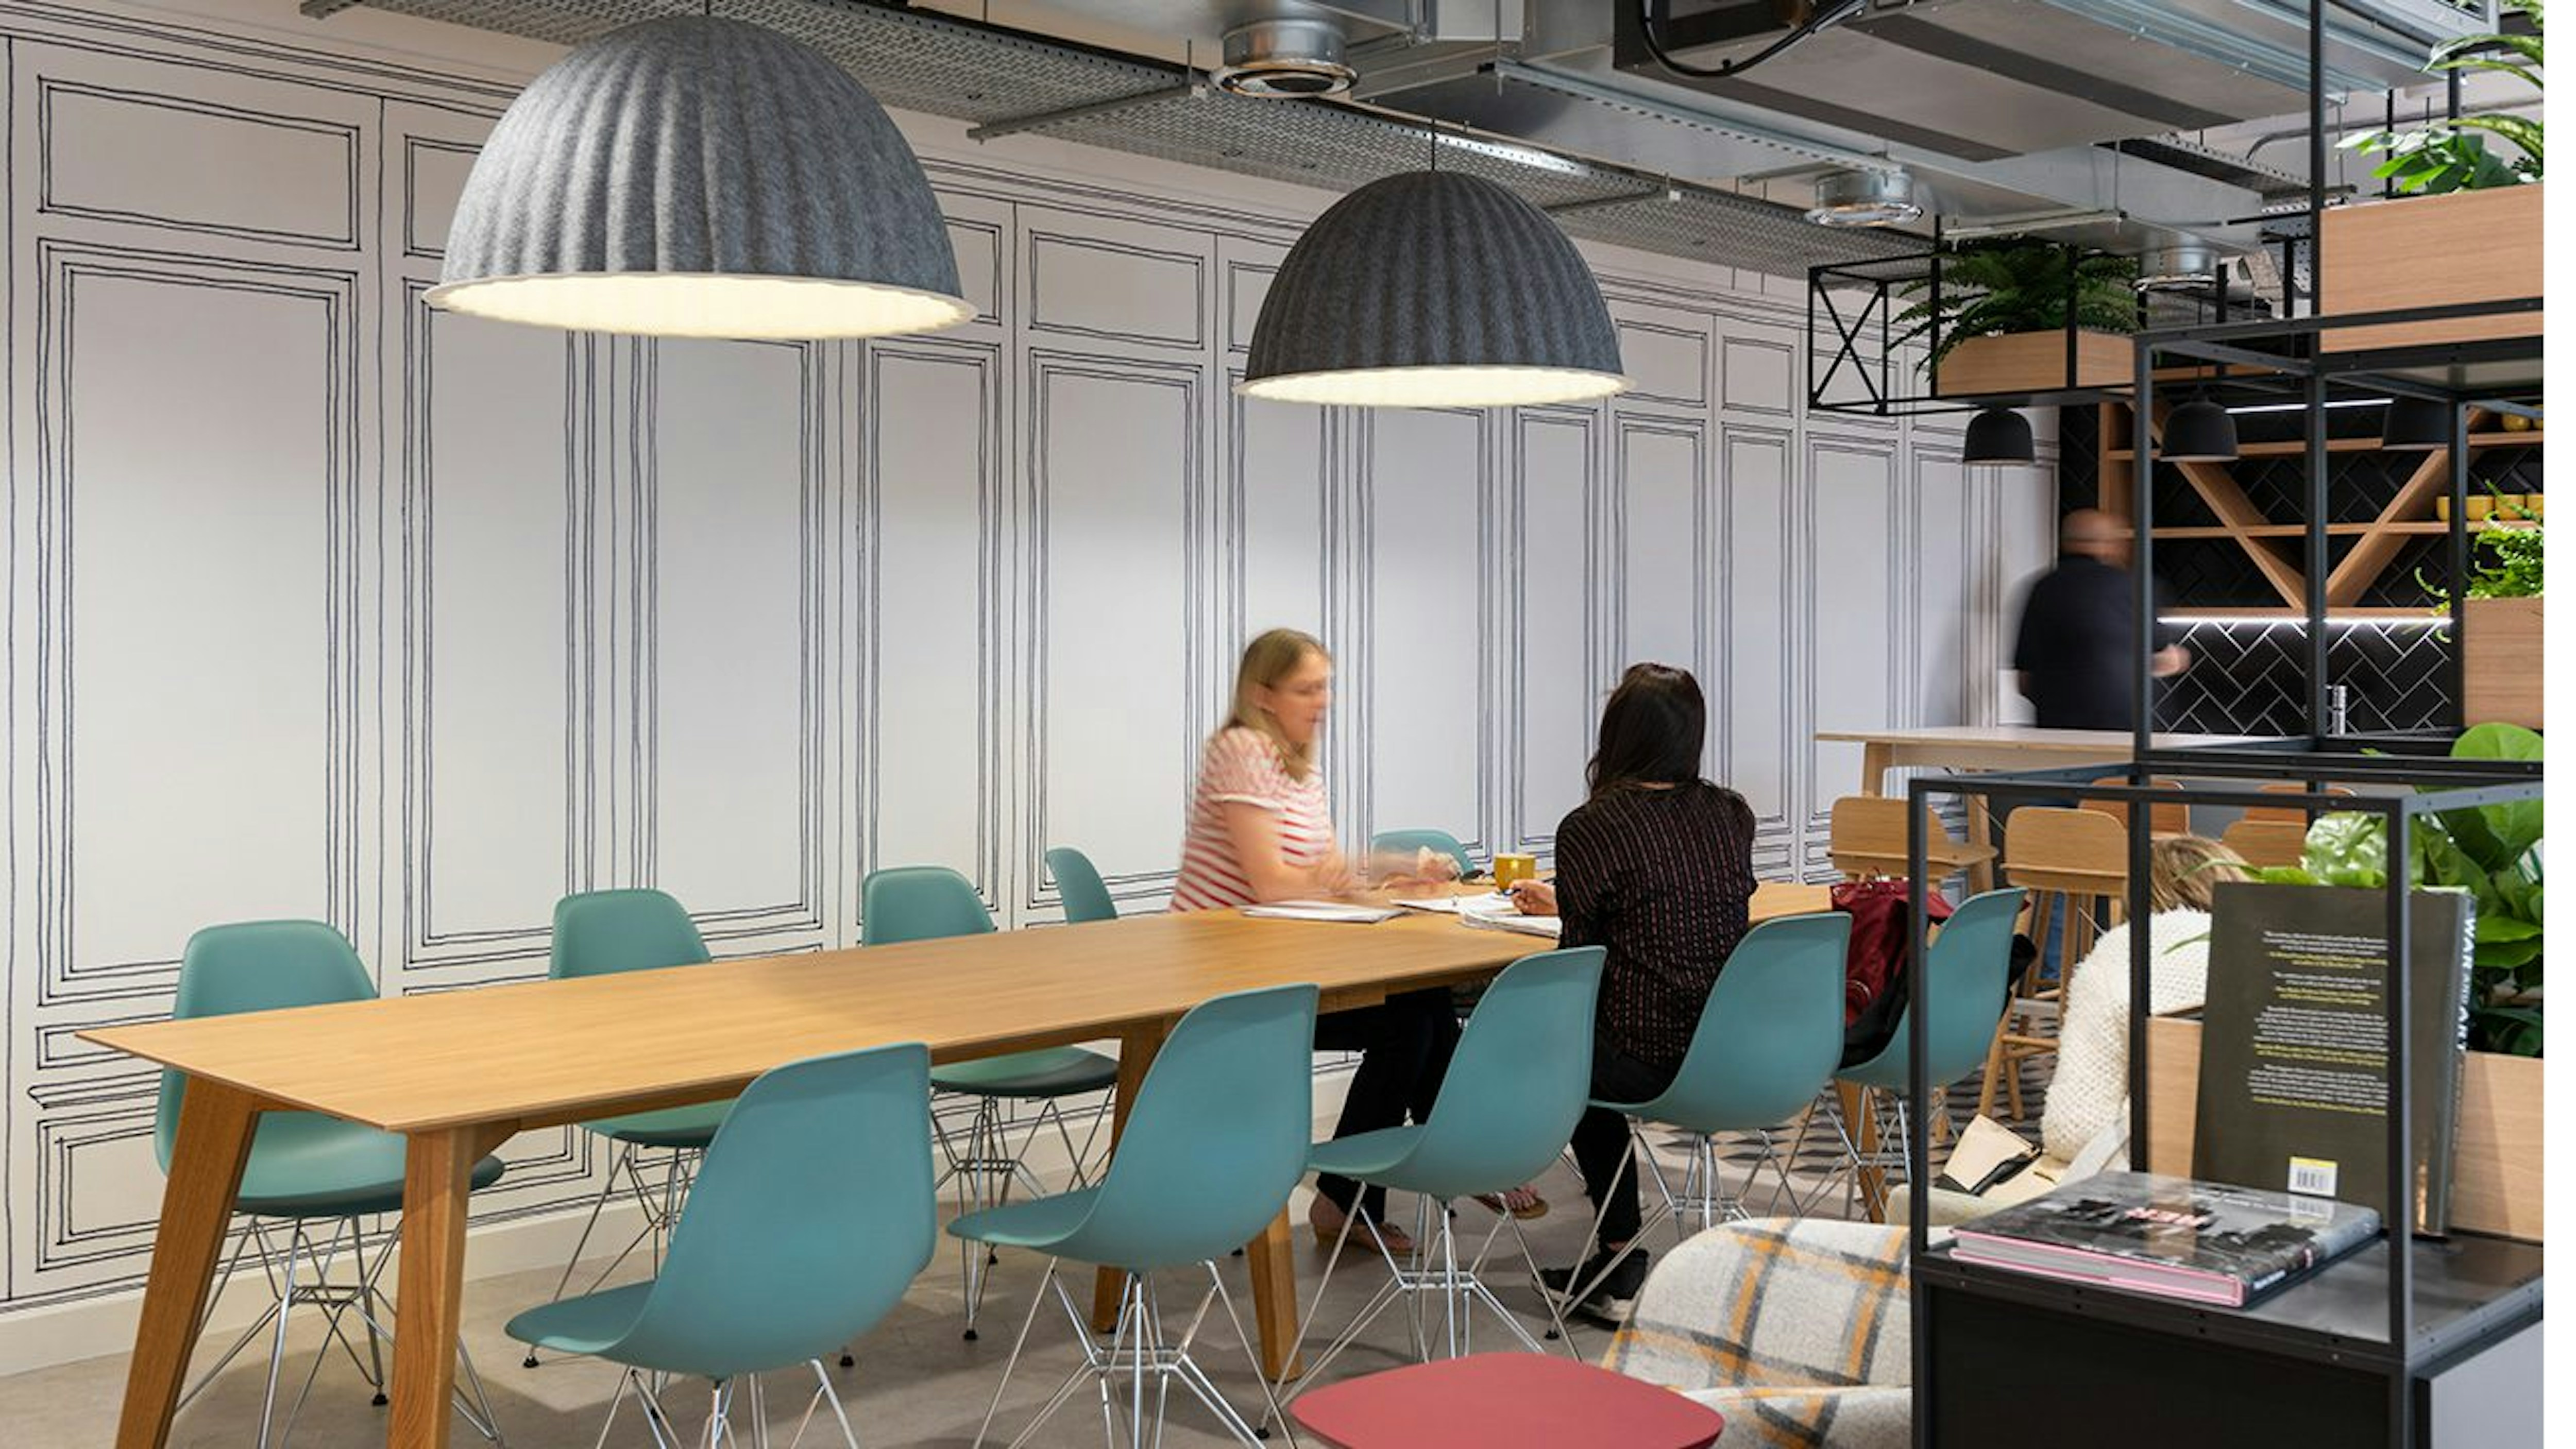 13 Effective Office Design Ideas for a Small Business